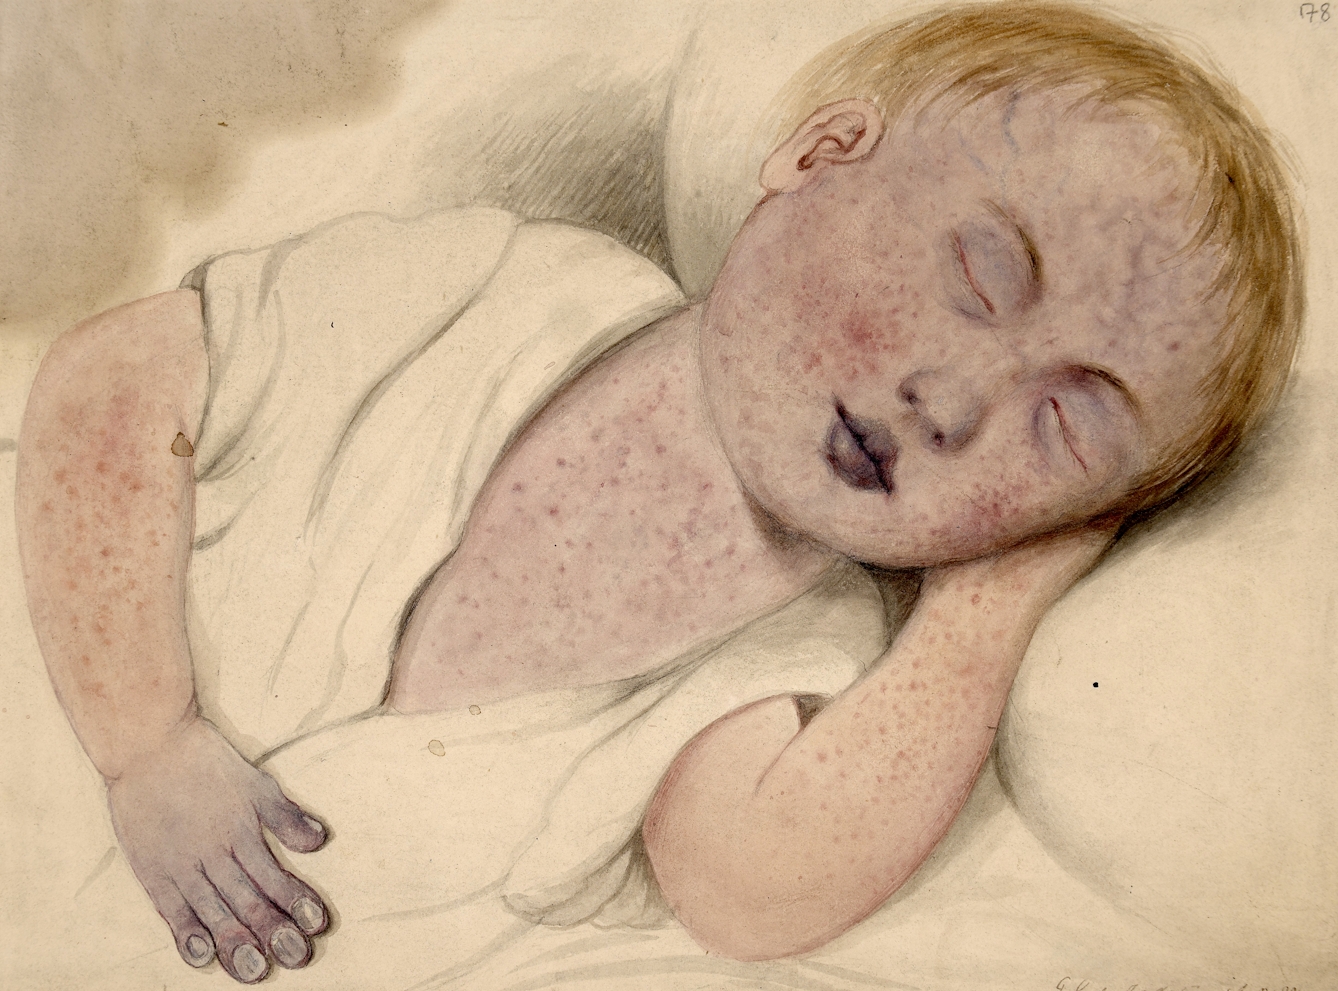 Drawing of a small child with cyanosis and measles